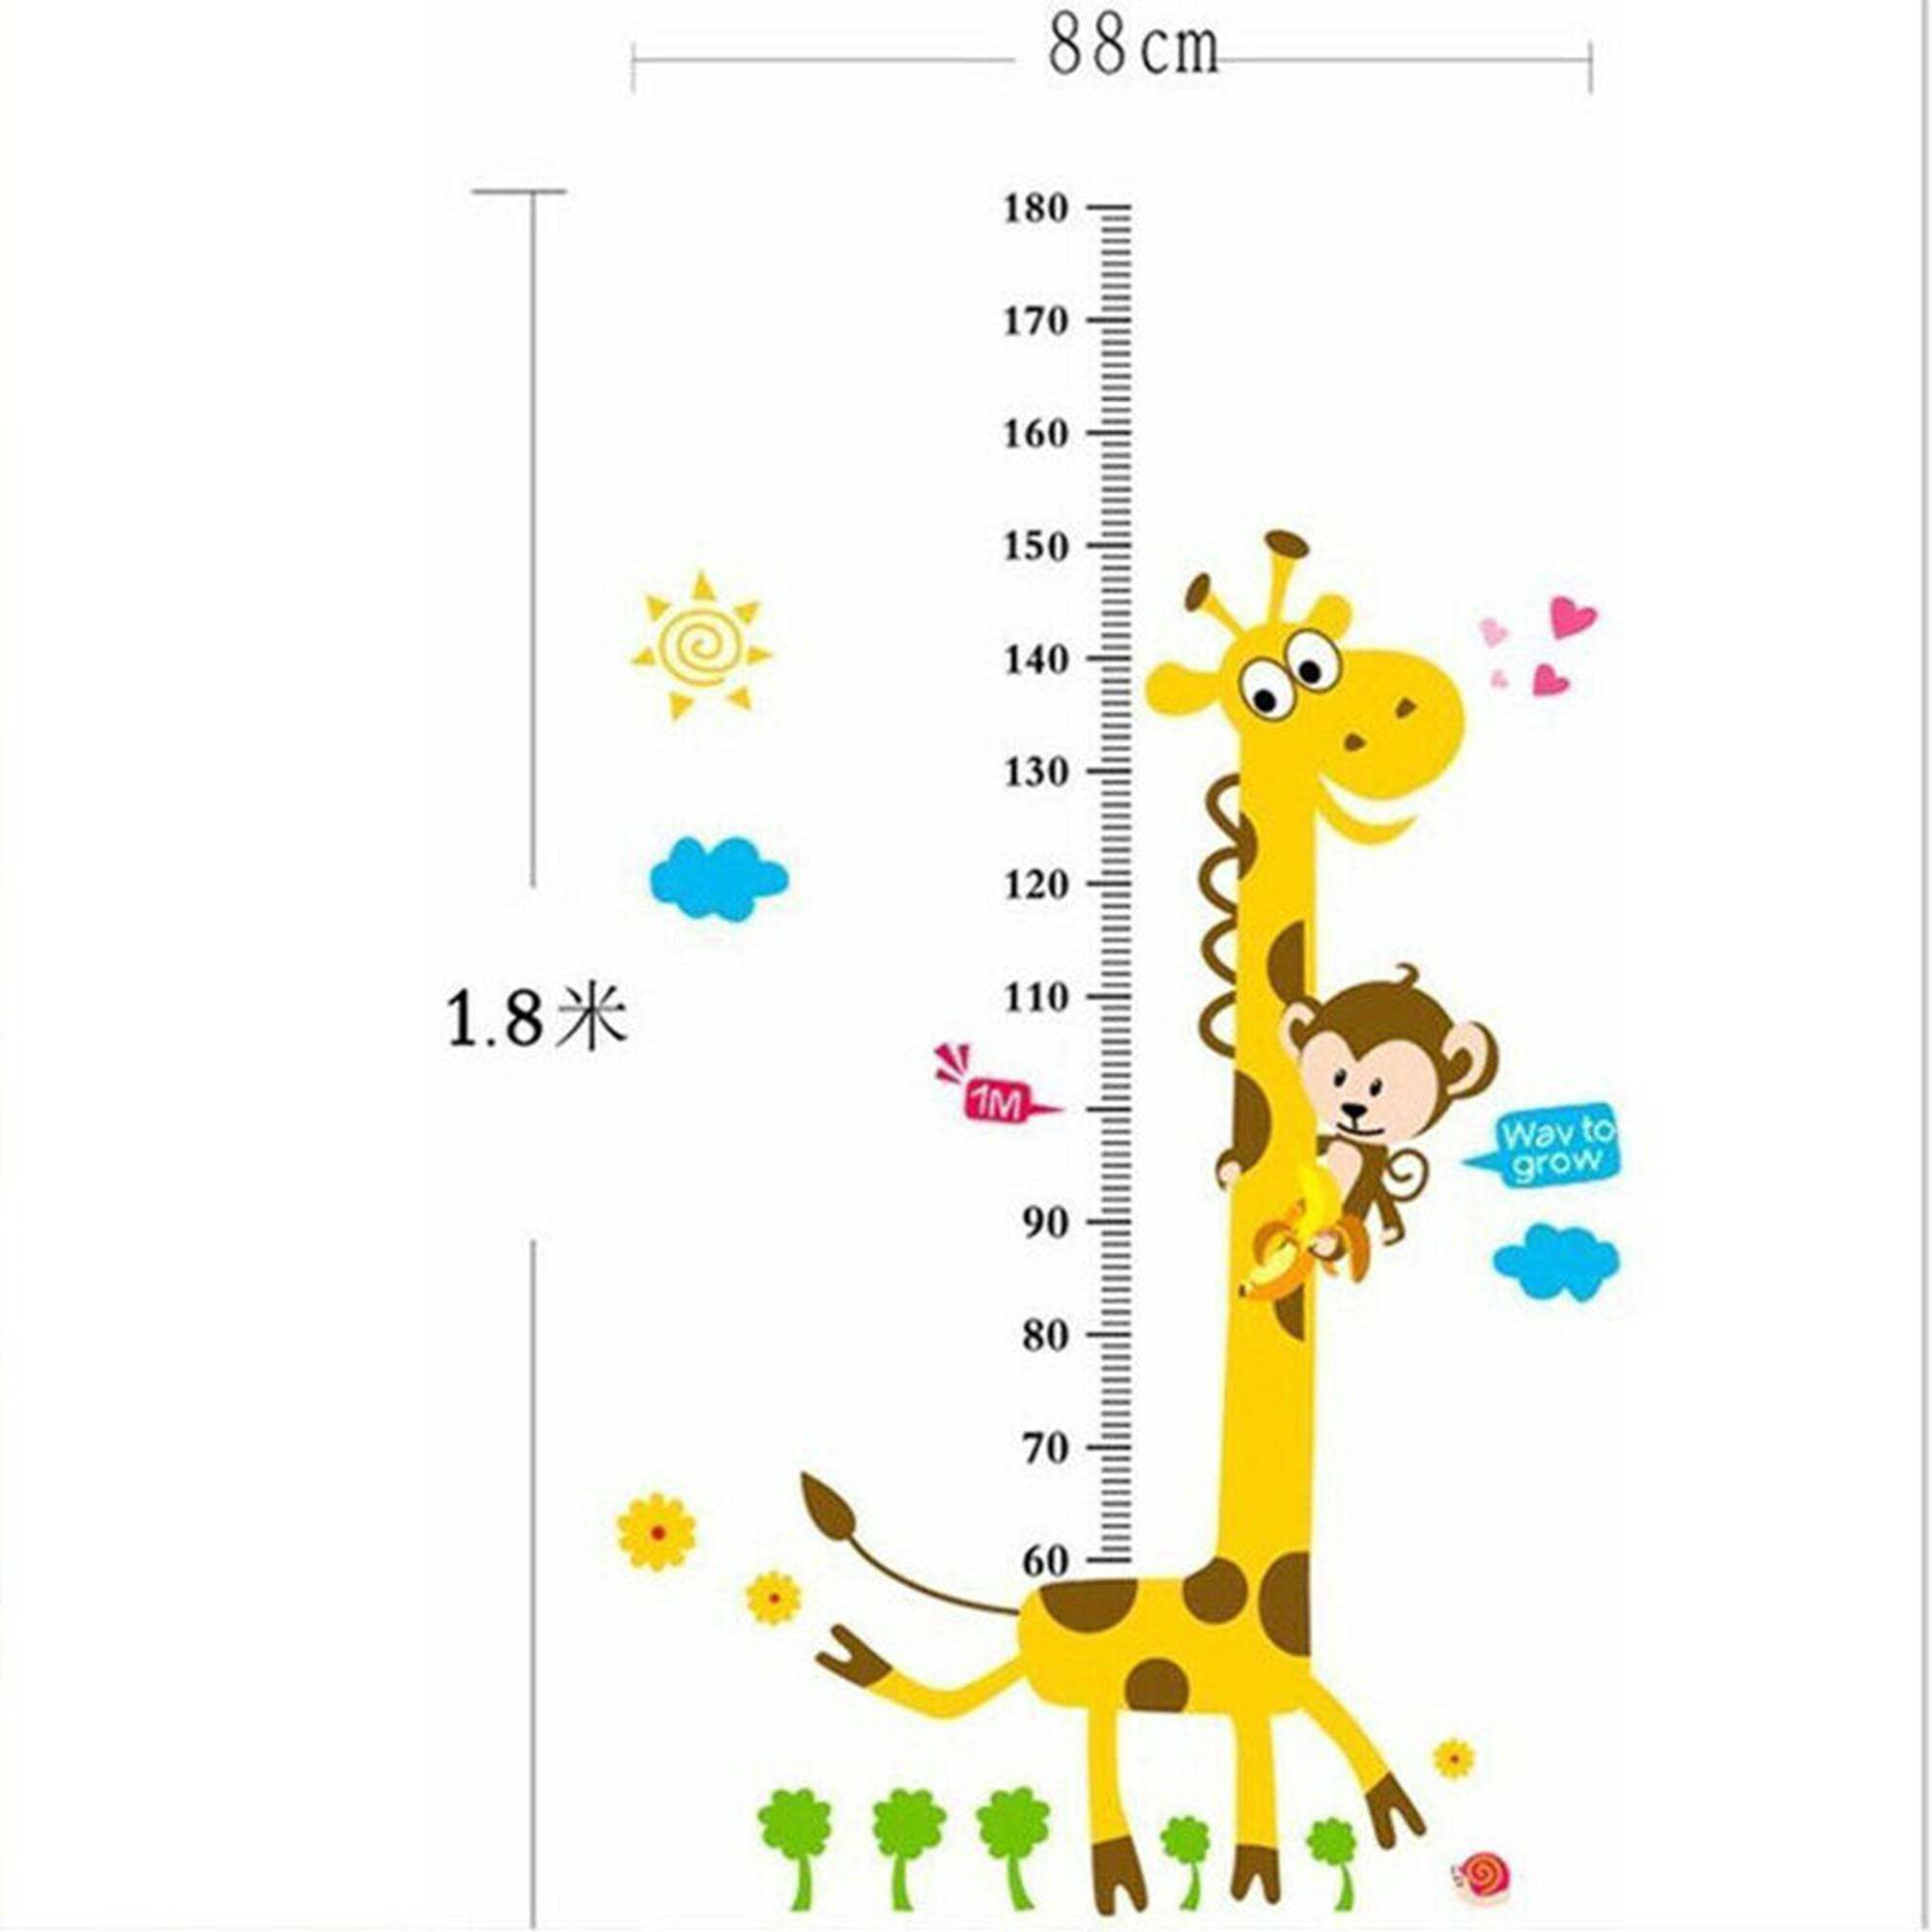 Fashion Animals Wall Sticker Kids Baby Height Chart Measurement Decal Removable 